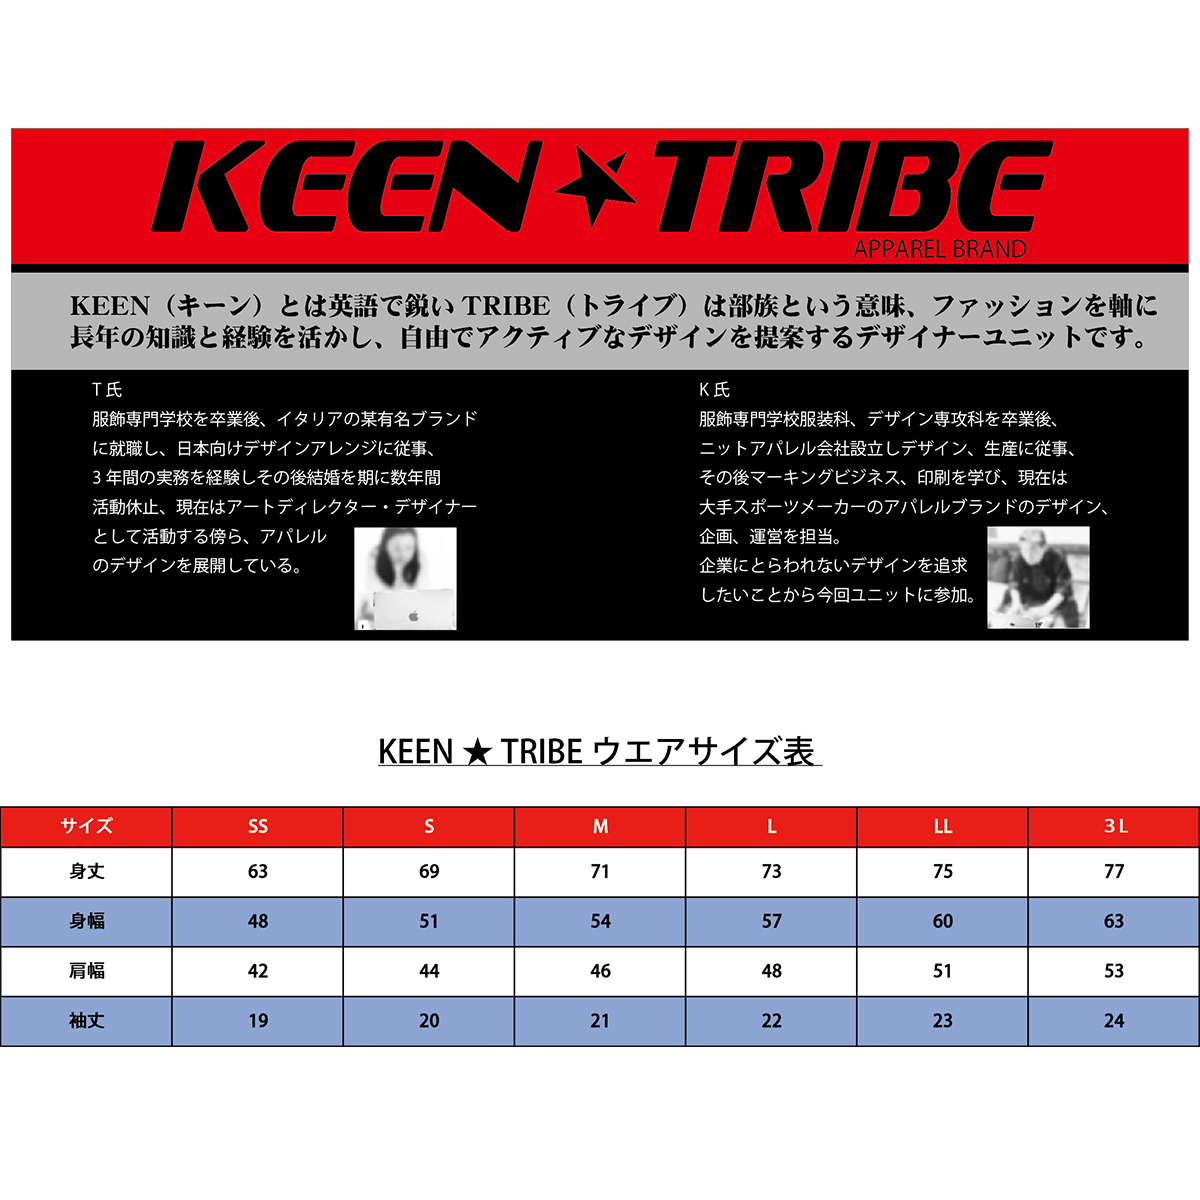 KEEN ★ TRIBE　KT-24(受注生産)